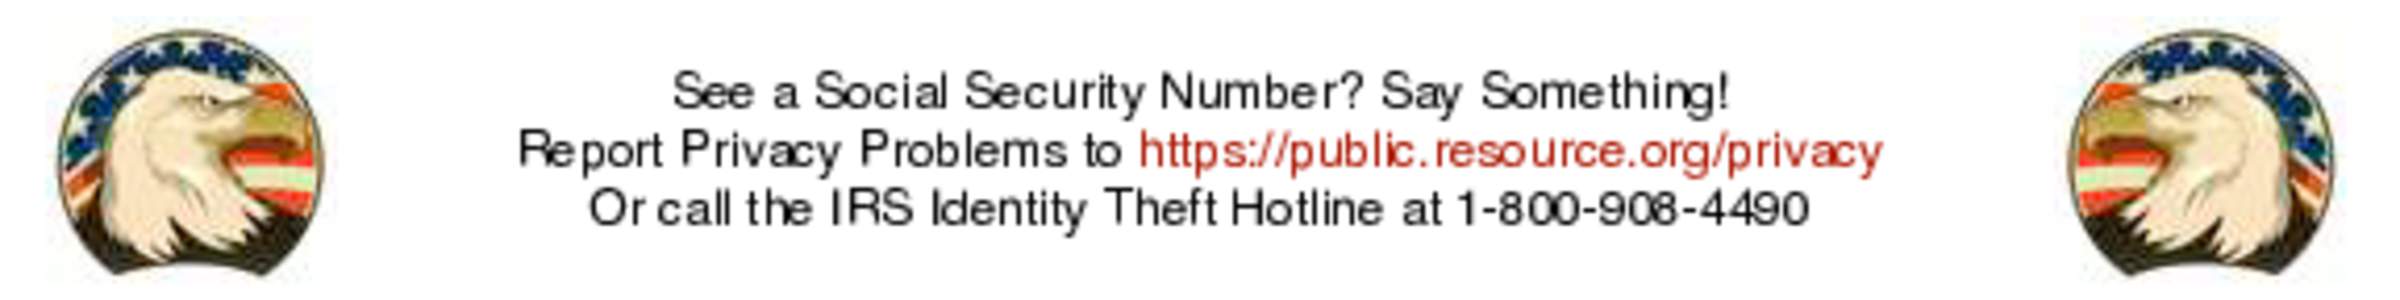 See a Social Security Number? Say Something! Report Privacy Problems to https://public.resource.org/privacy Or call the IRS Identity Theft Hotline at 